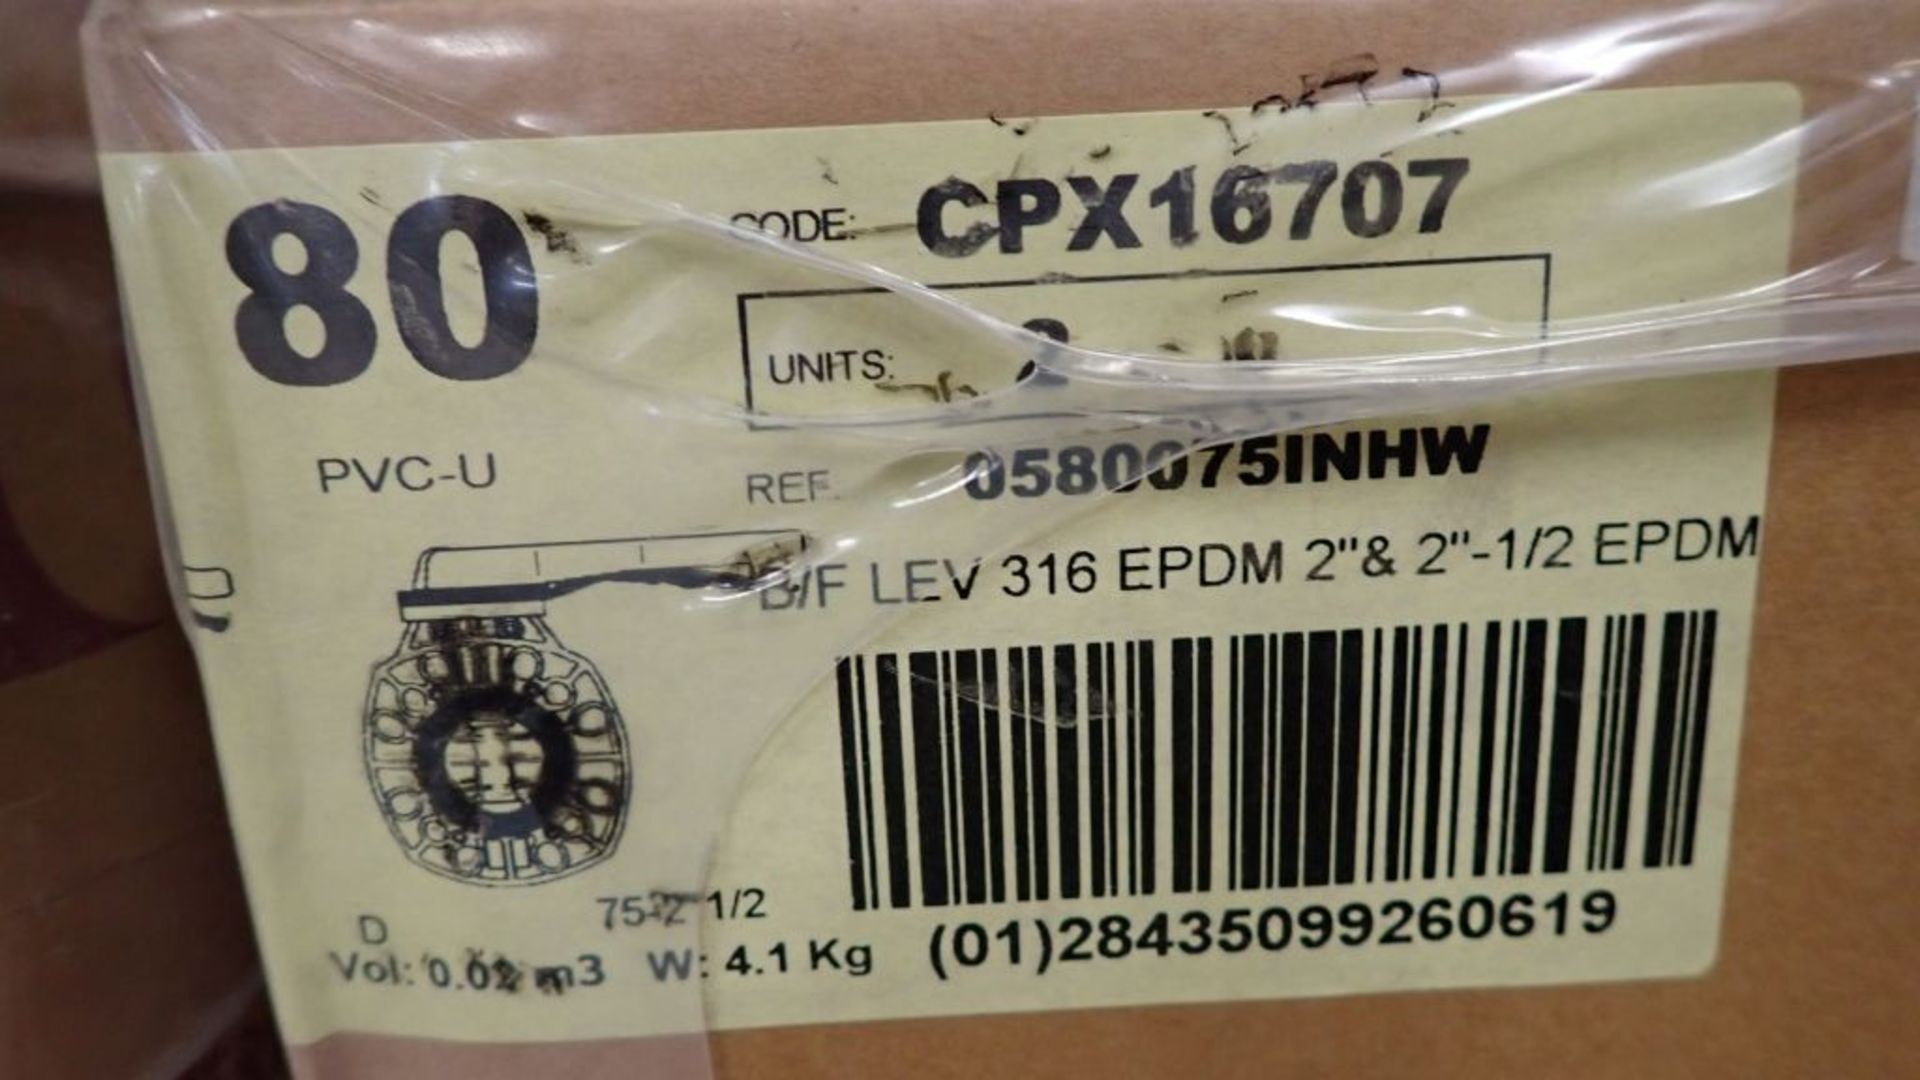 Lot of (8) Cepex Butterfly Valves | Part No. CPX16707; Size: 2-1/2"; Tag: 232701 - Image 6 of 11